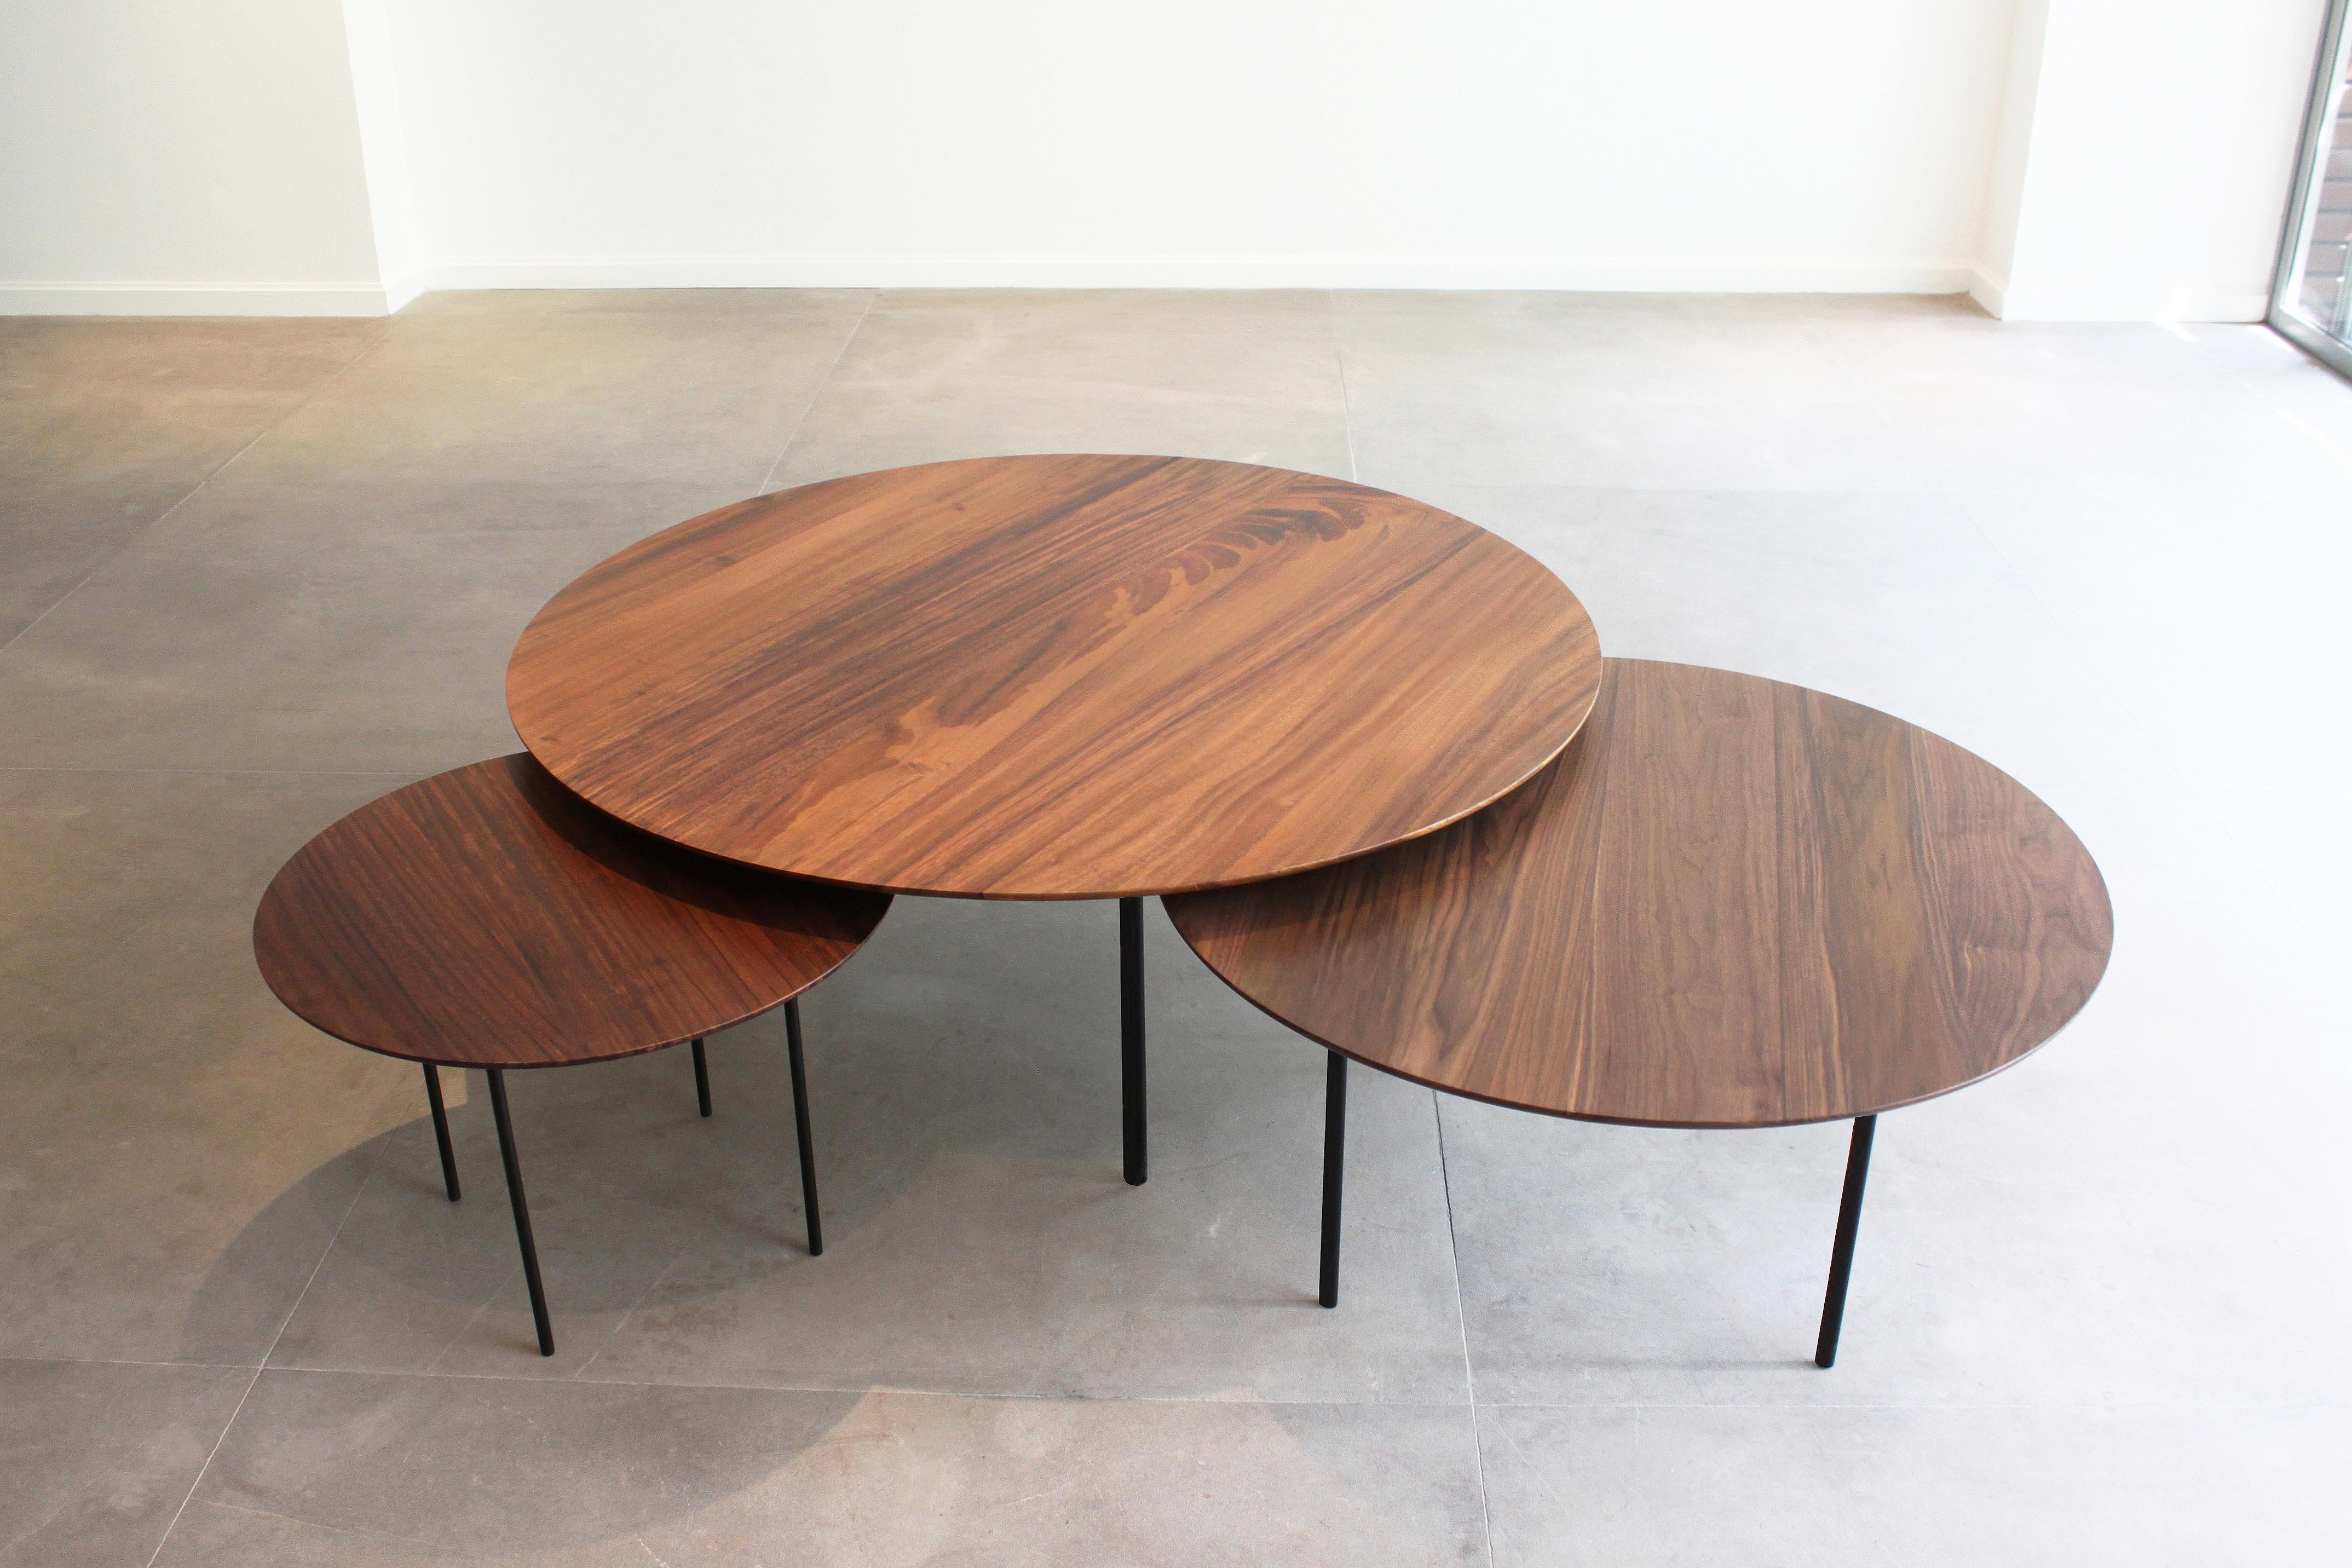 Contemporary short table design by Maria Beckmann. Handcrafted in solid walnut and Parota, lacquered steel. Sizes are customizable.

Available in multiple dimensions and materials:

Types of wood: Solid spring wood / Parota / Tzalam / ash / oak /